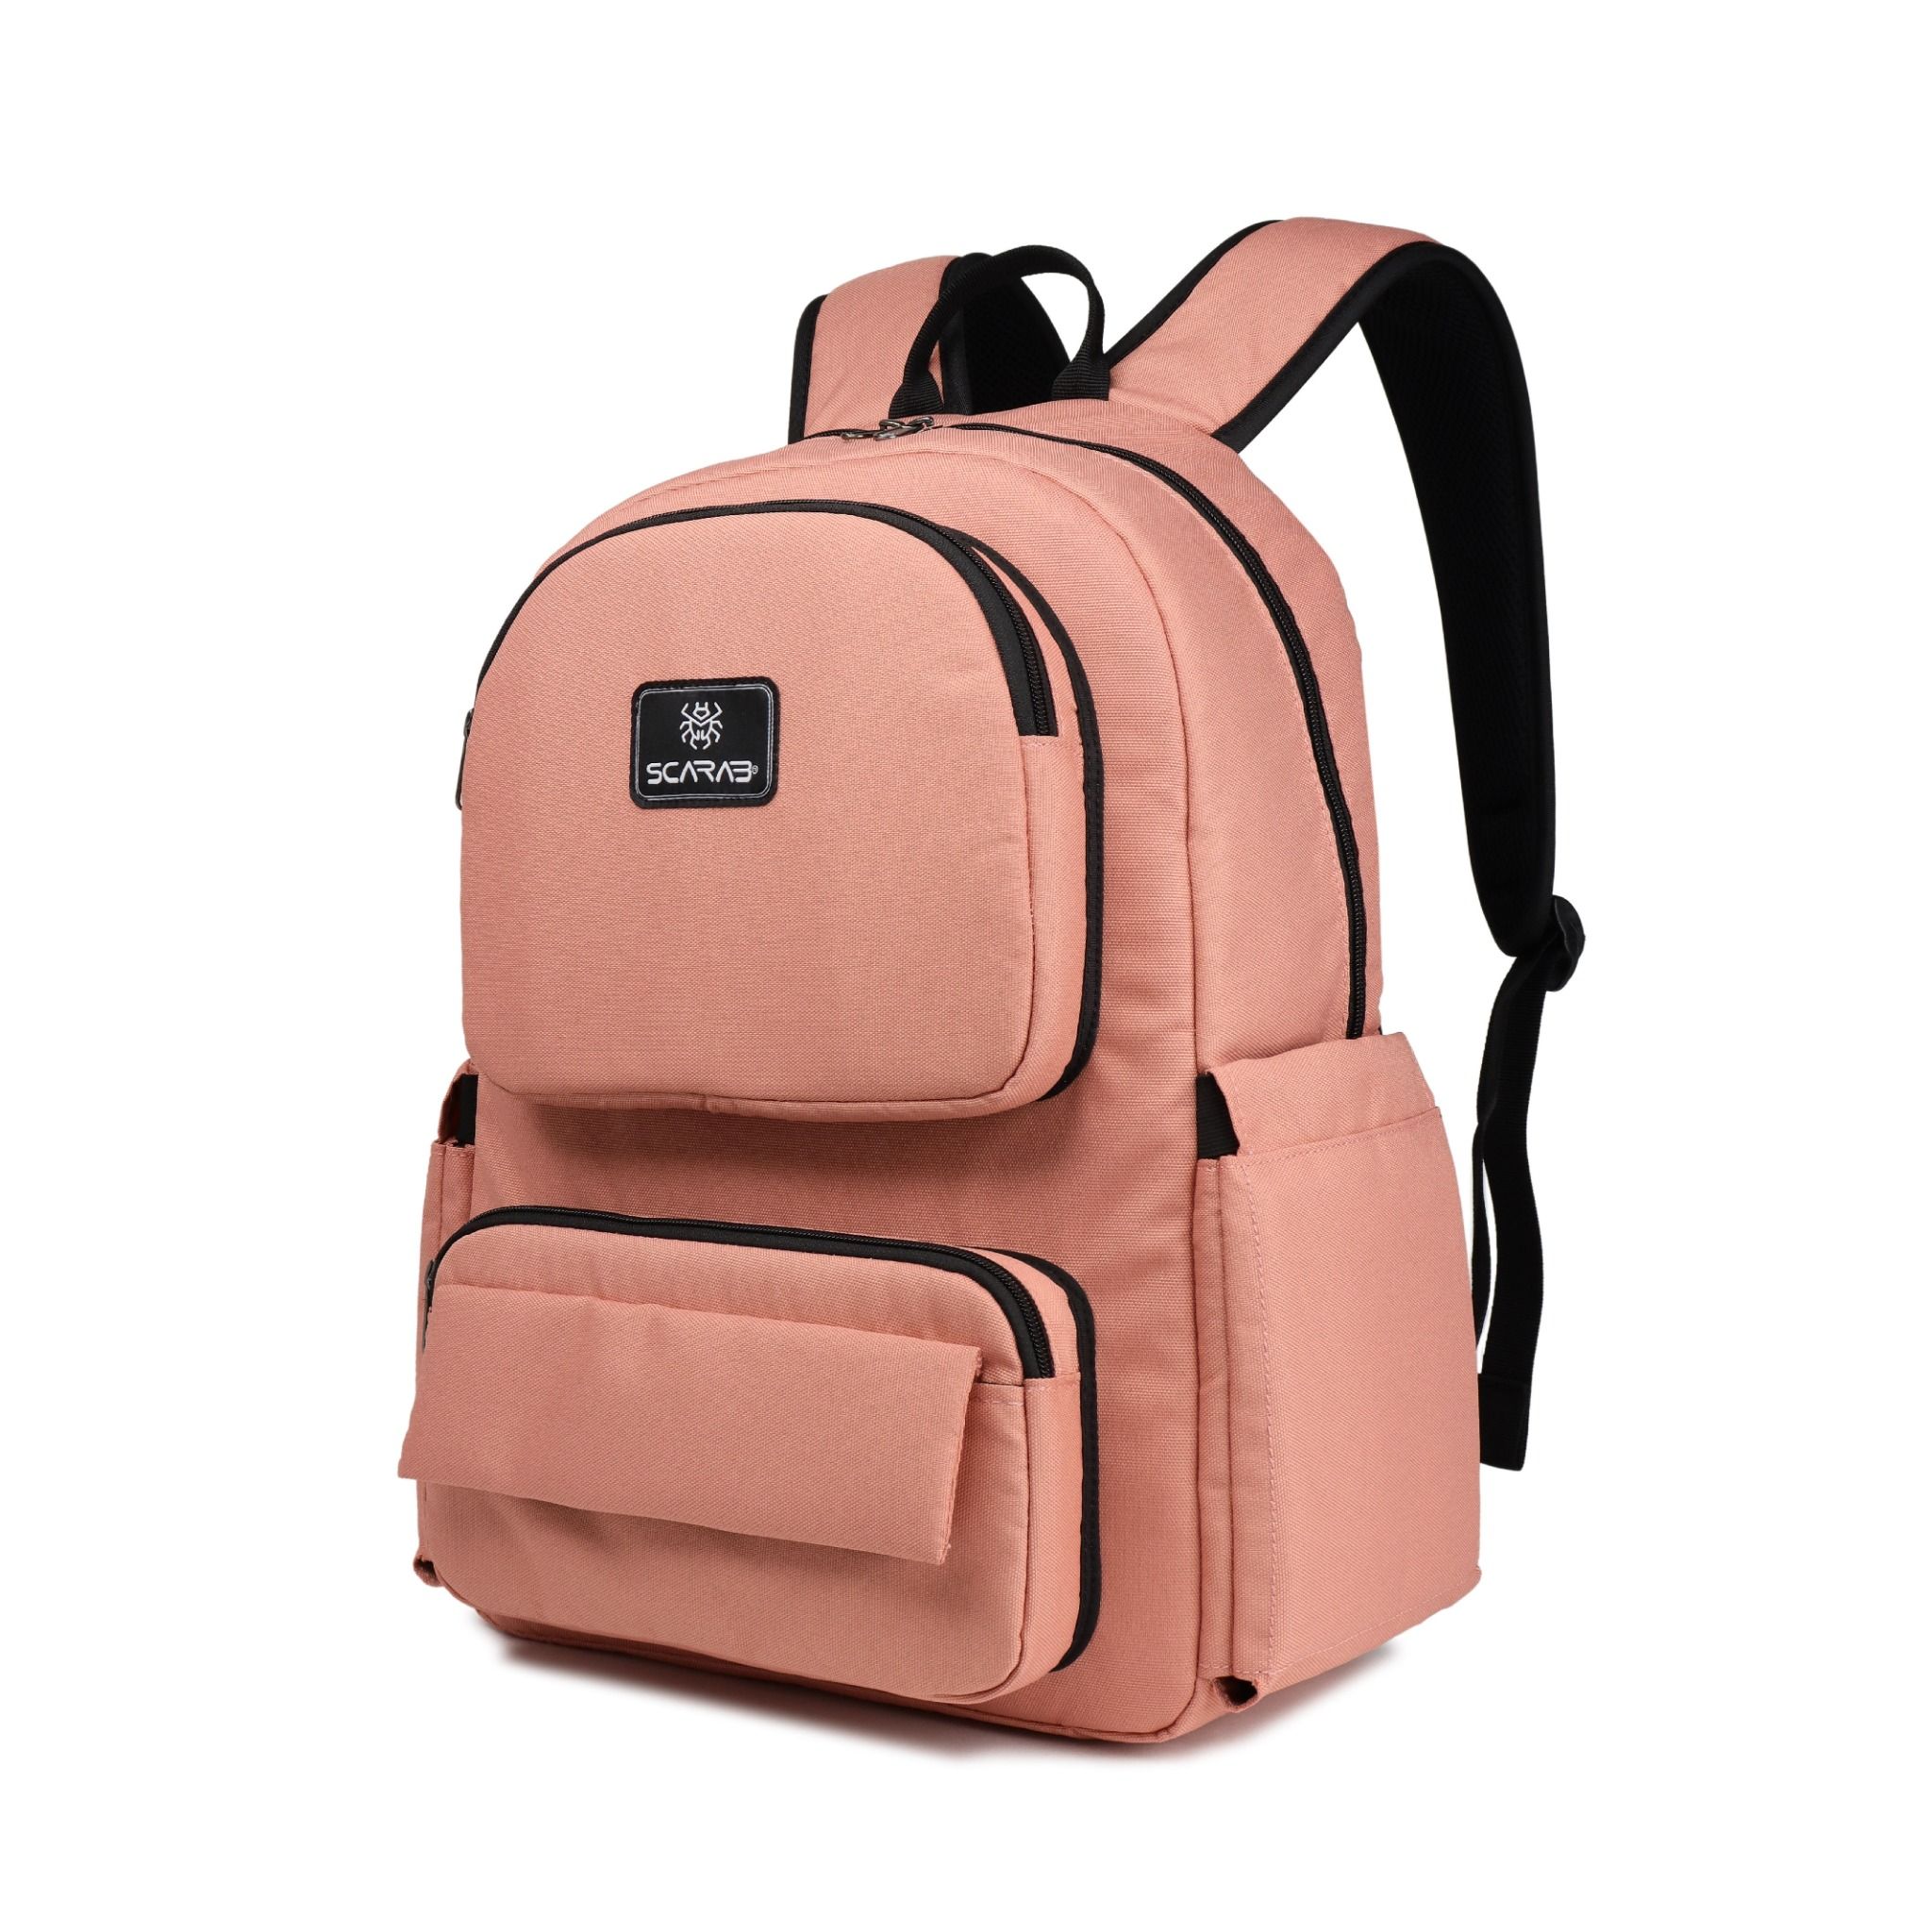  FUSSY VERSION 2 BACKPACK - CORAL 